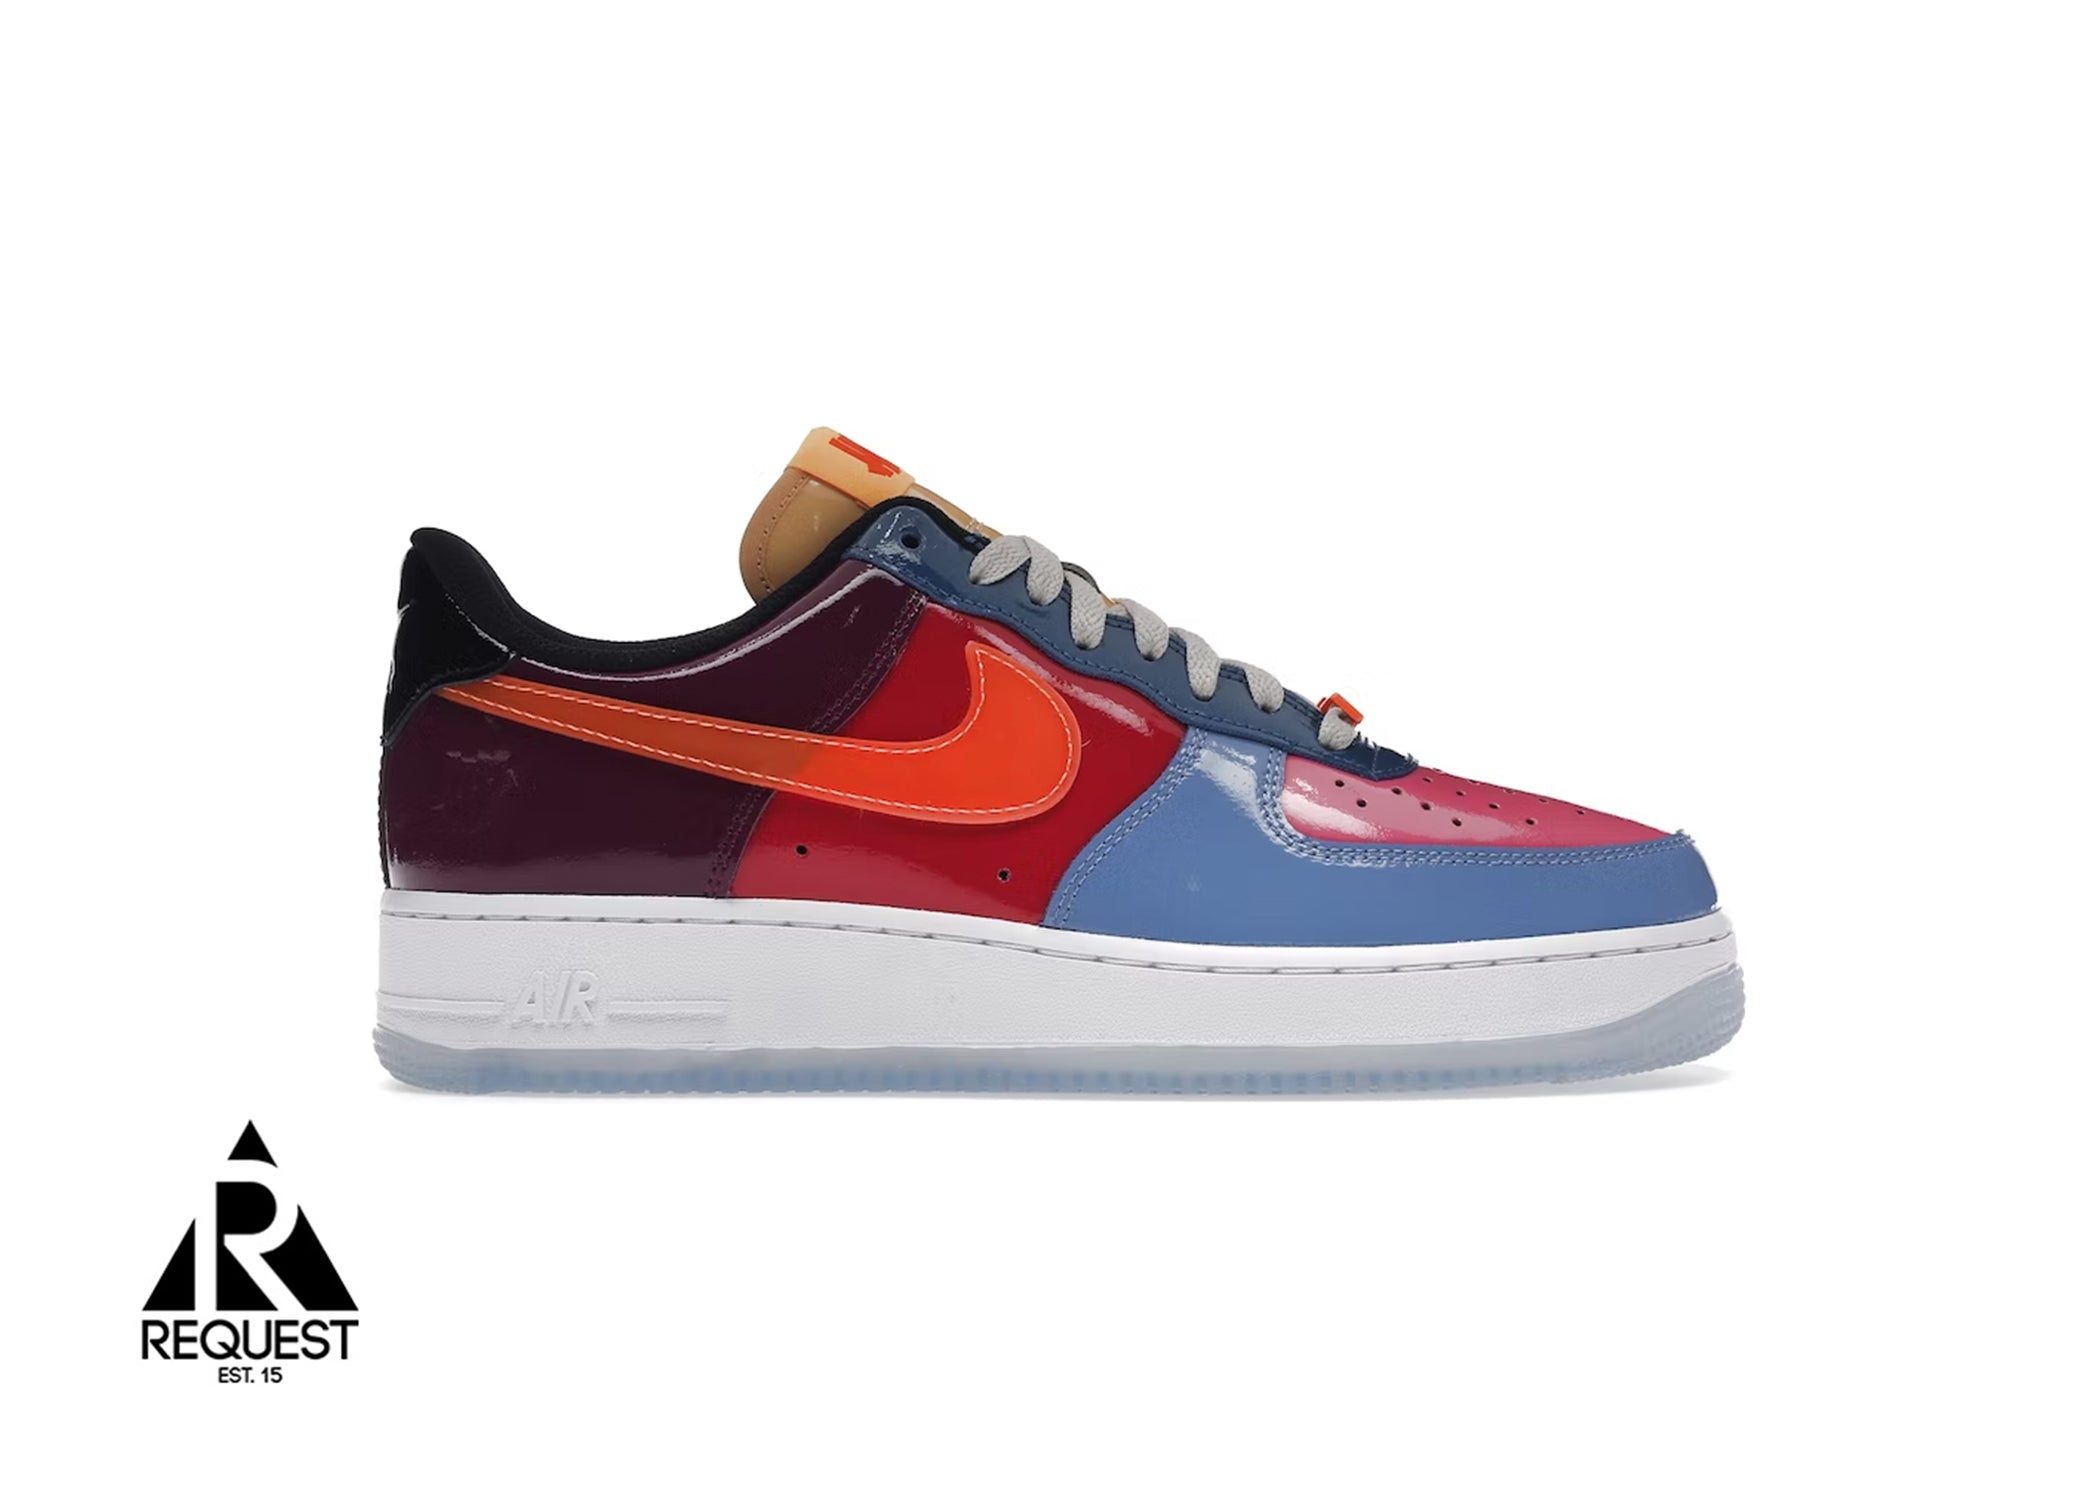 Nike Air Force 1 Low SP "Undefeated Multi-Patent Total Orange"